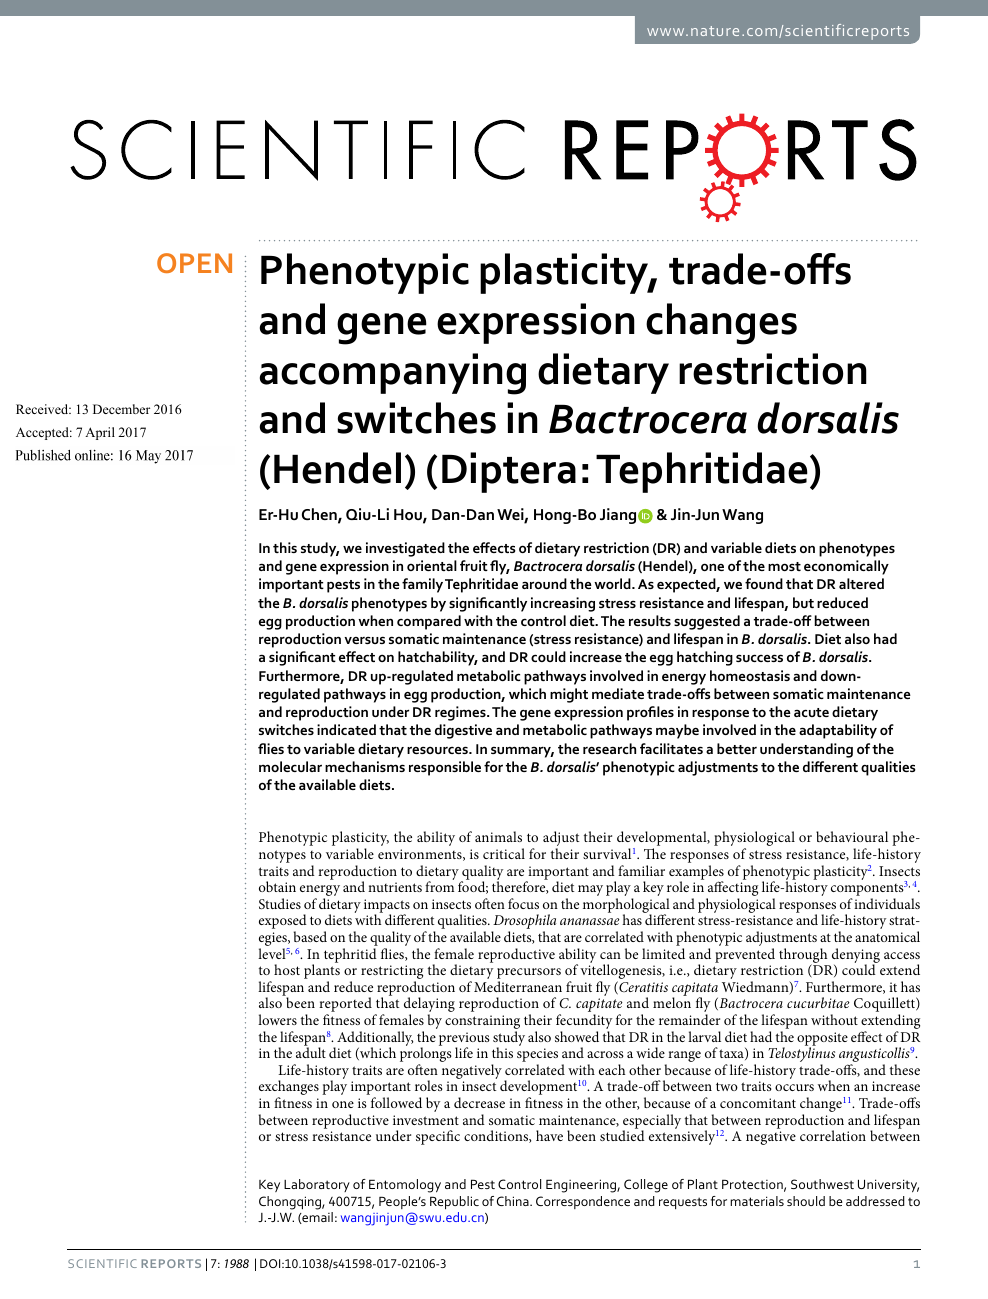 Phenotypic Plasticity Trade Offs And Gene Expression Changes Accompanying Dietary Restriction And Switches In Bactrocera Dorsalis Hendel Diptera Tephritidae Topic Of Research Paper In Biological Sciences Download Scholarly Article Pdf And Read